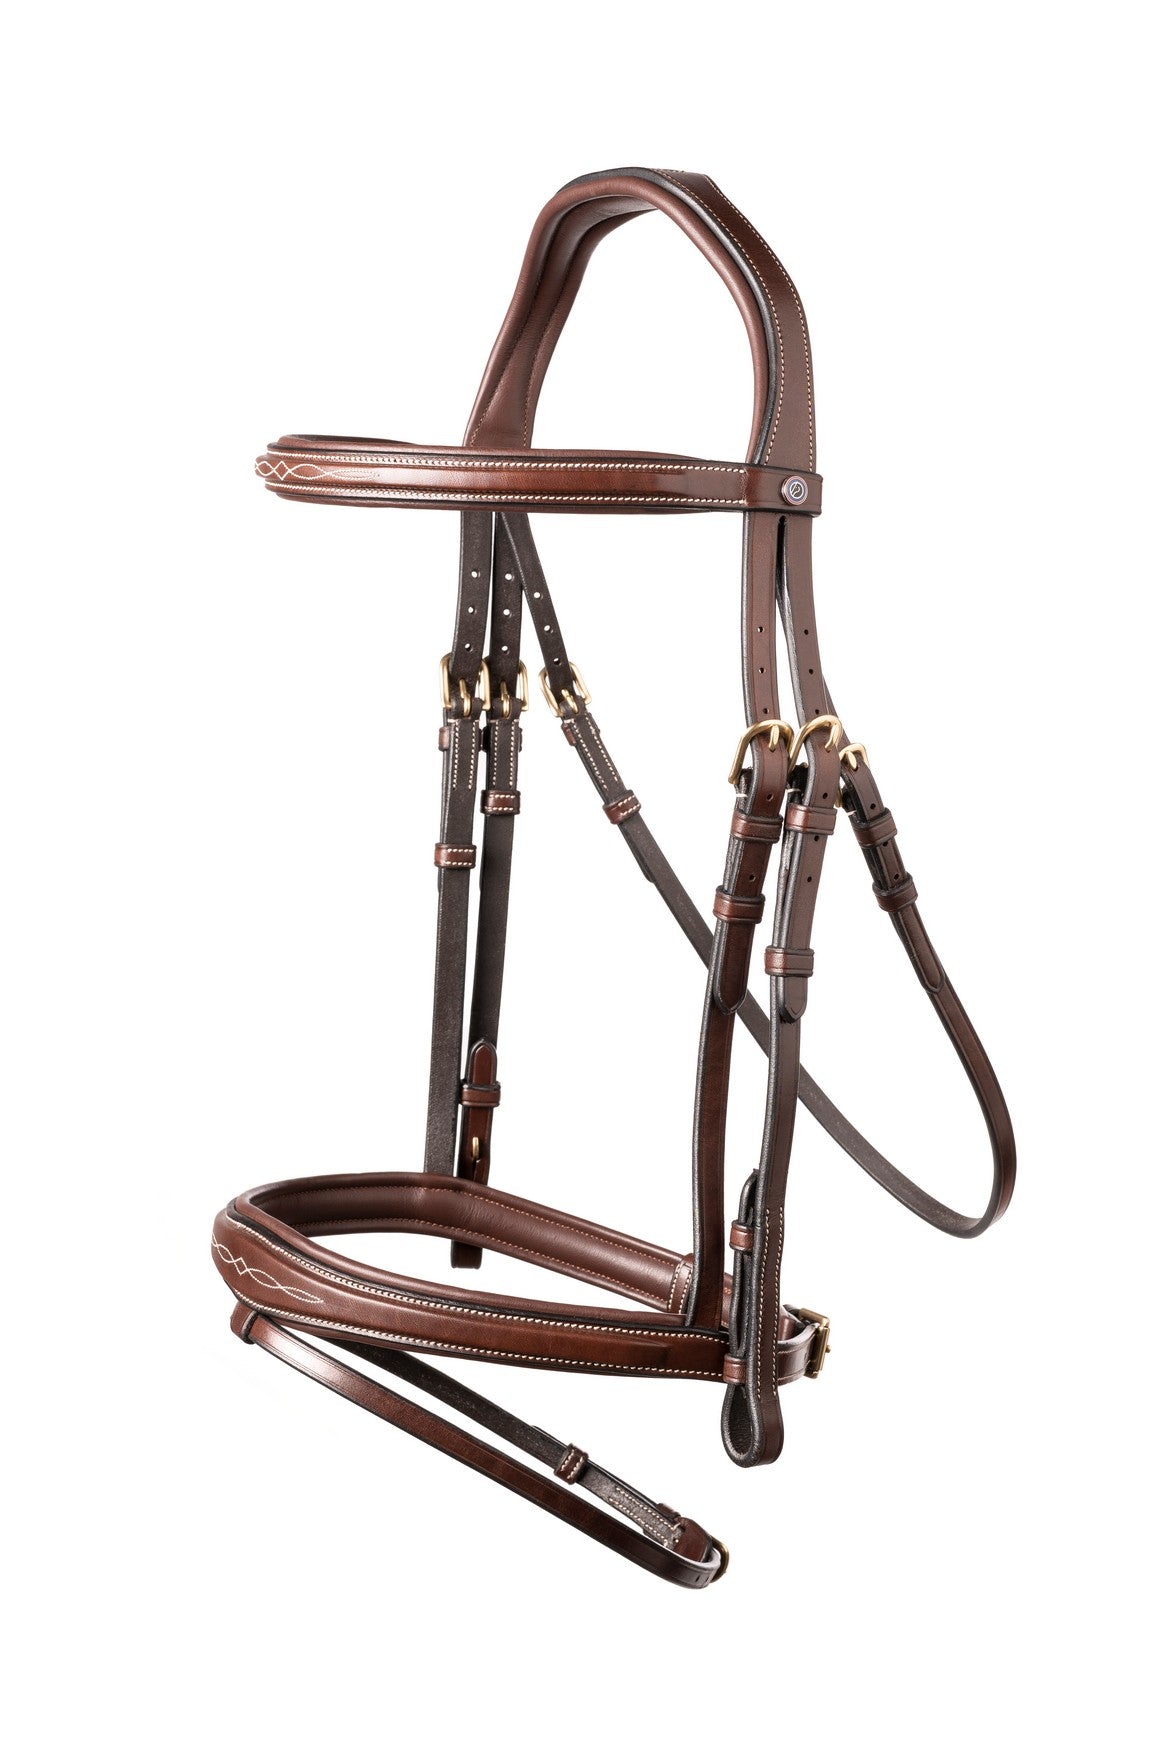 TRUST bridle Amsterdam anatomical combined noseband gold buckle Brown